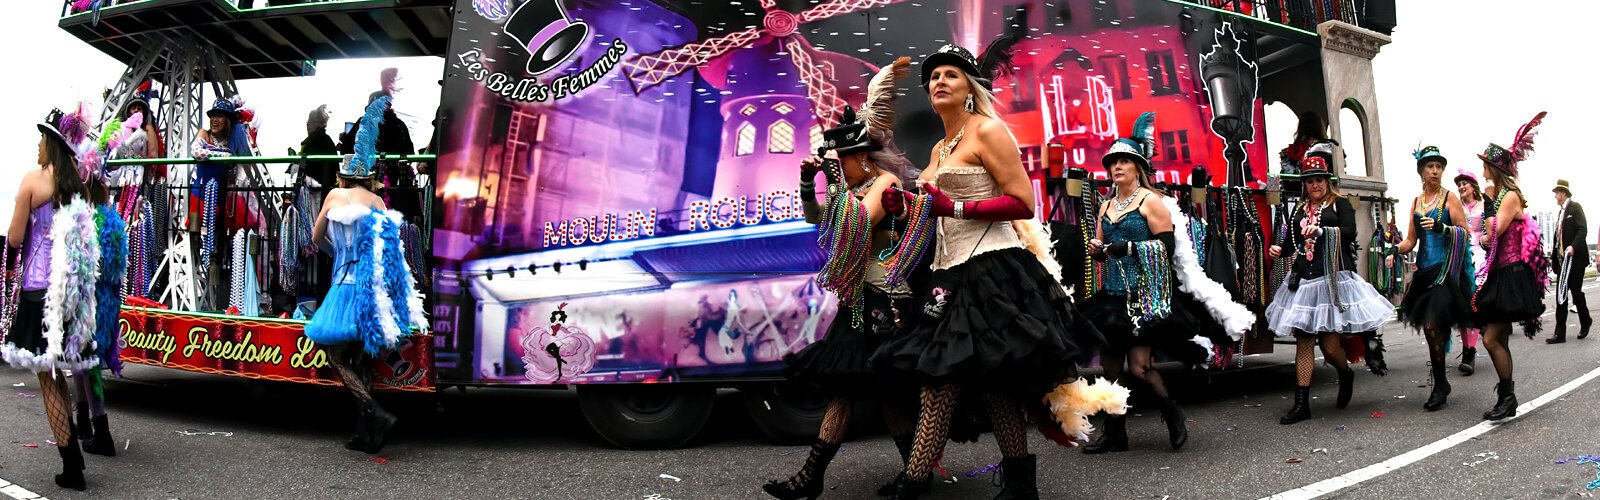 The Moulin Rouge float with Les Belles Femmes participate in the Gasparilla parade of pirates, giving a whiff of French flair to the boisterous event.